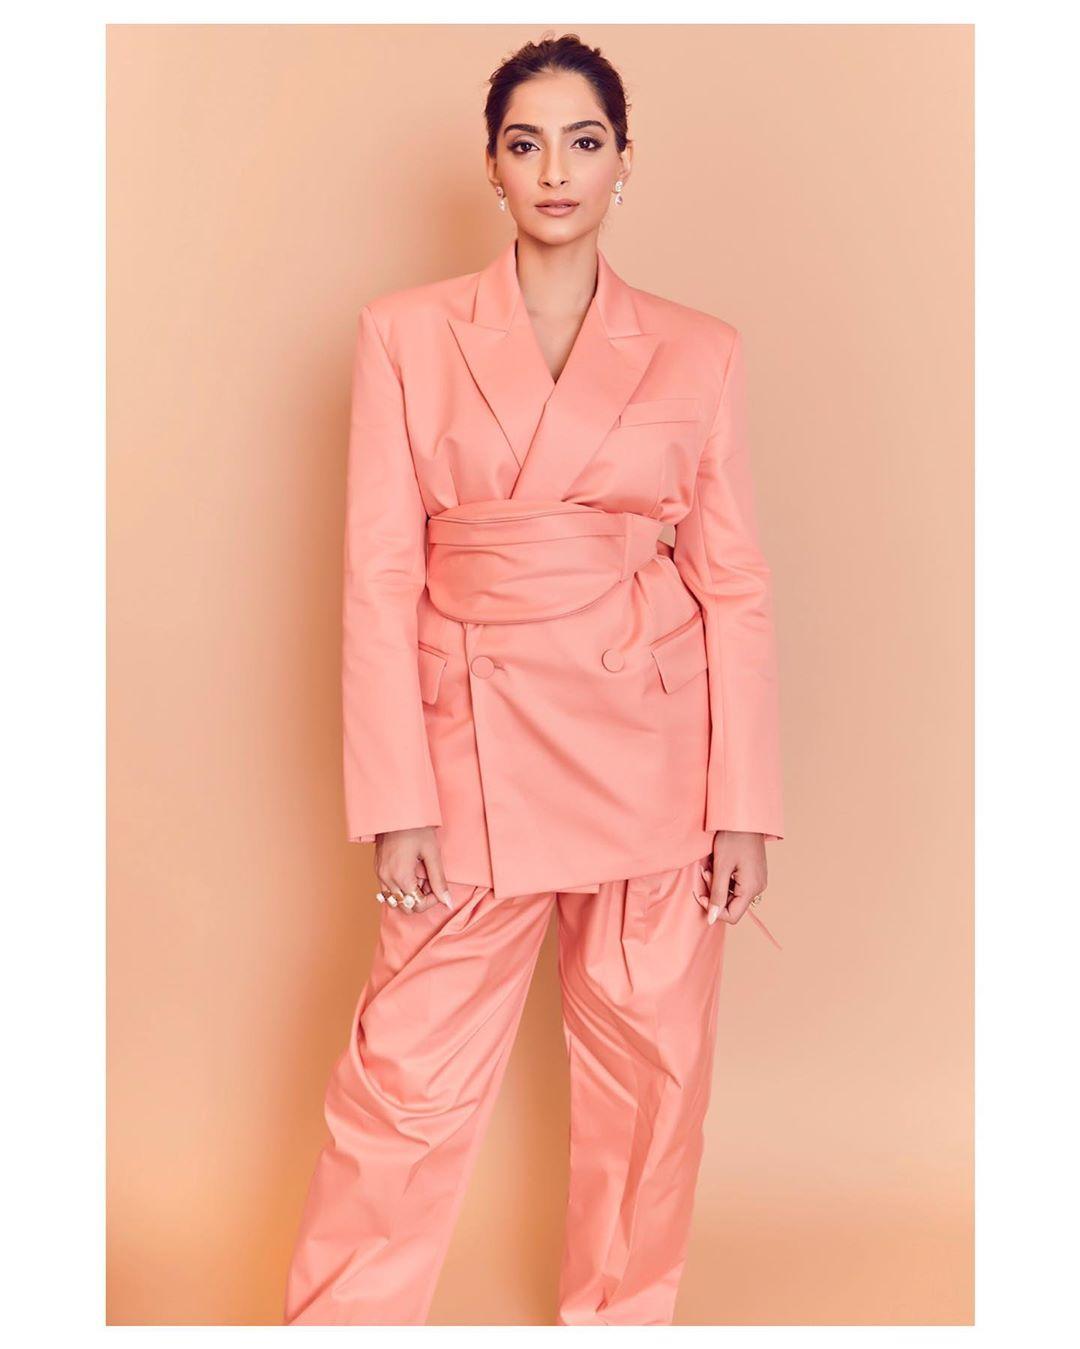 Rihanna Pink Suit and Fanny Pack